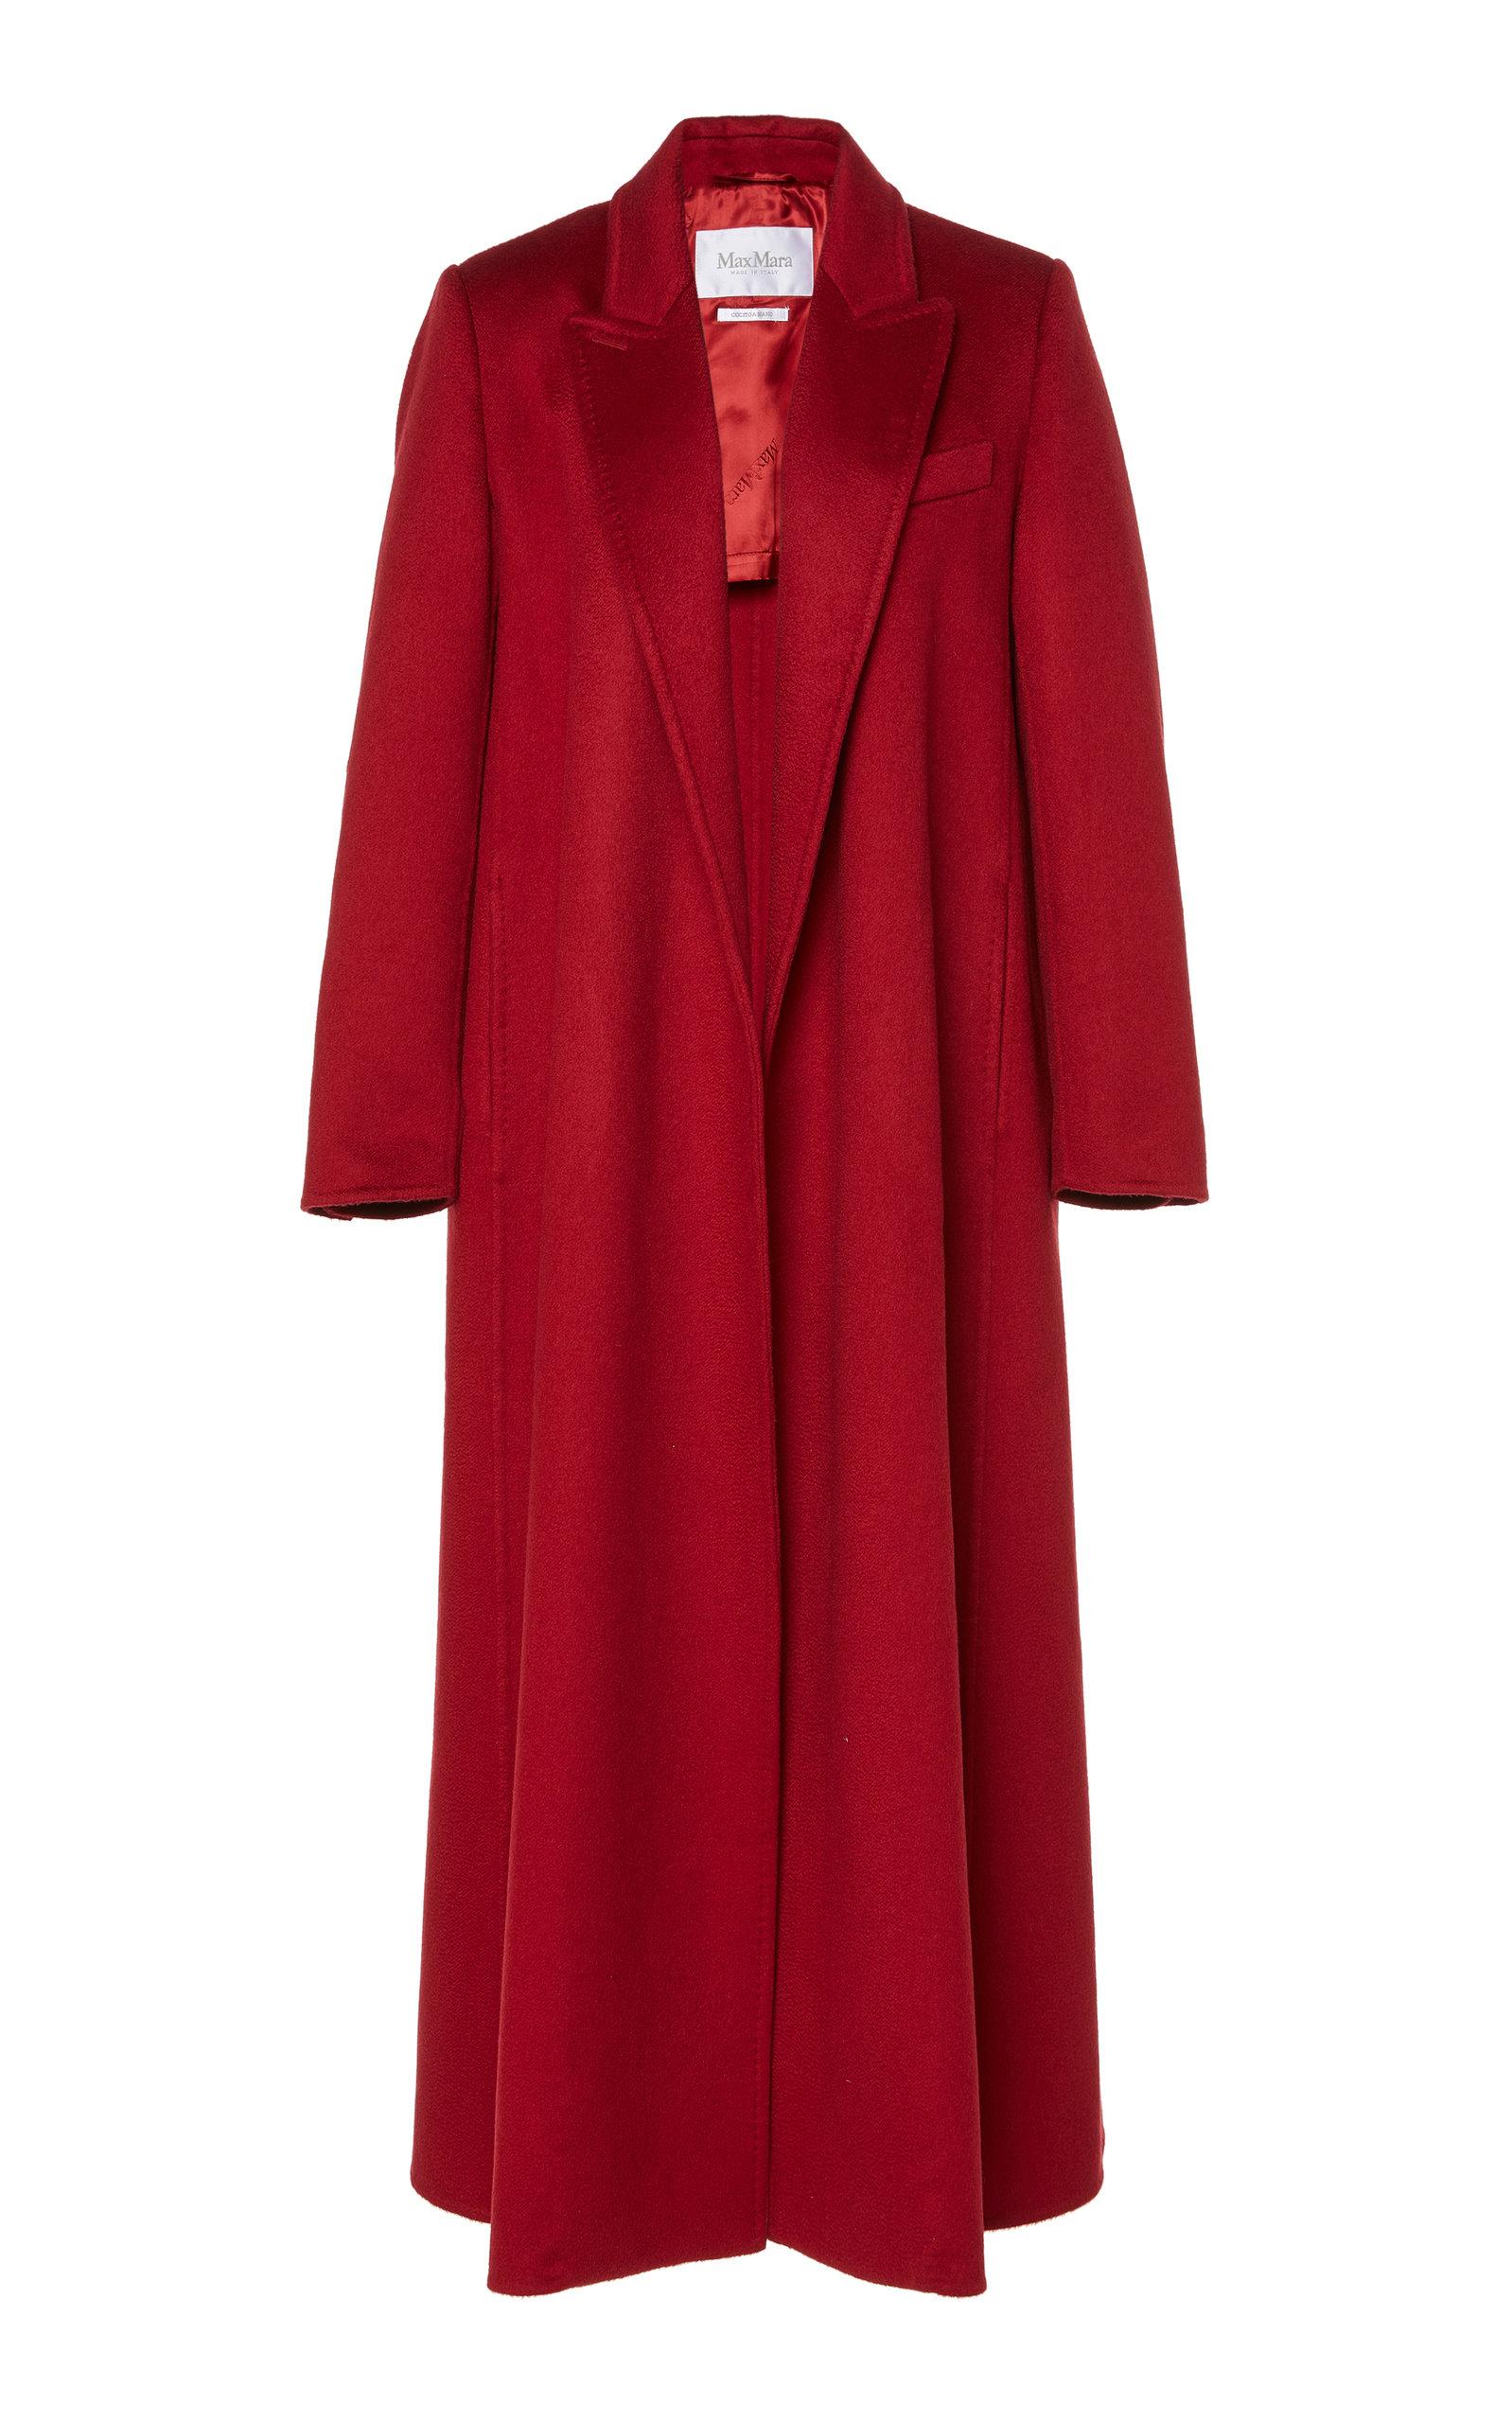 Max Mara Kriss Brushed Cashmere Maxi Coat in Red - Lyst